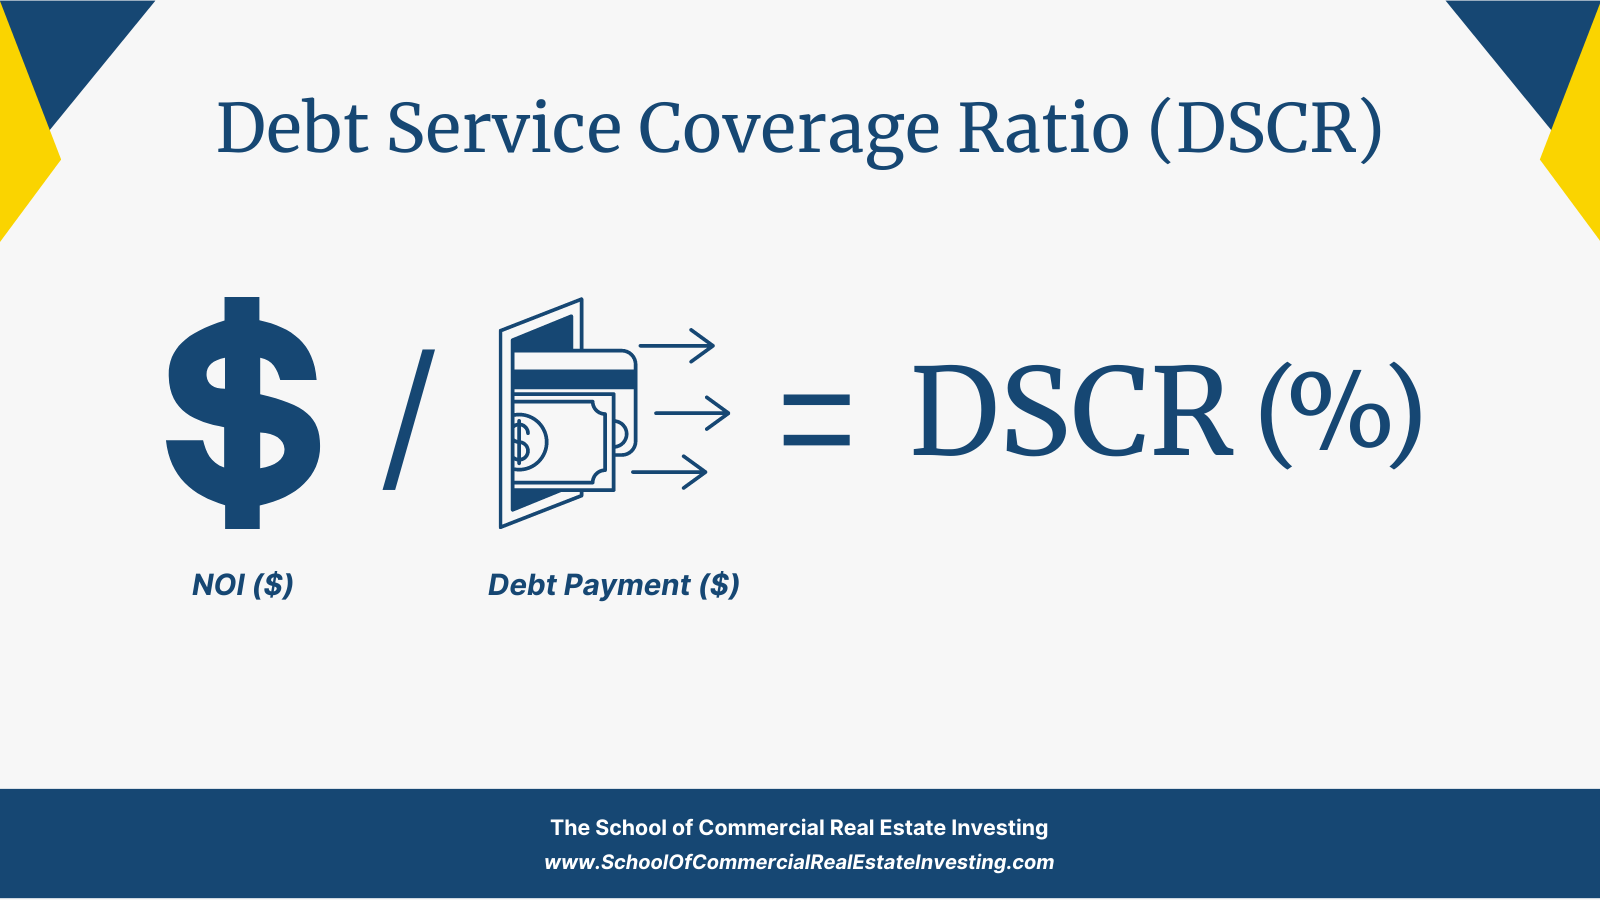 Calculate Debt Service Coverage Ratio (DSCR) by dividing the NOI by the Debt Payment.